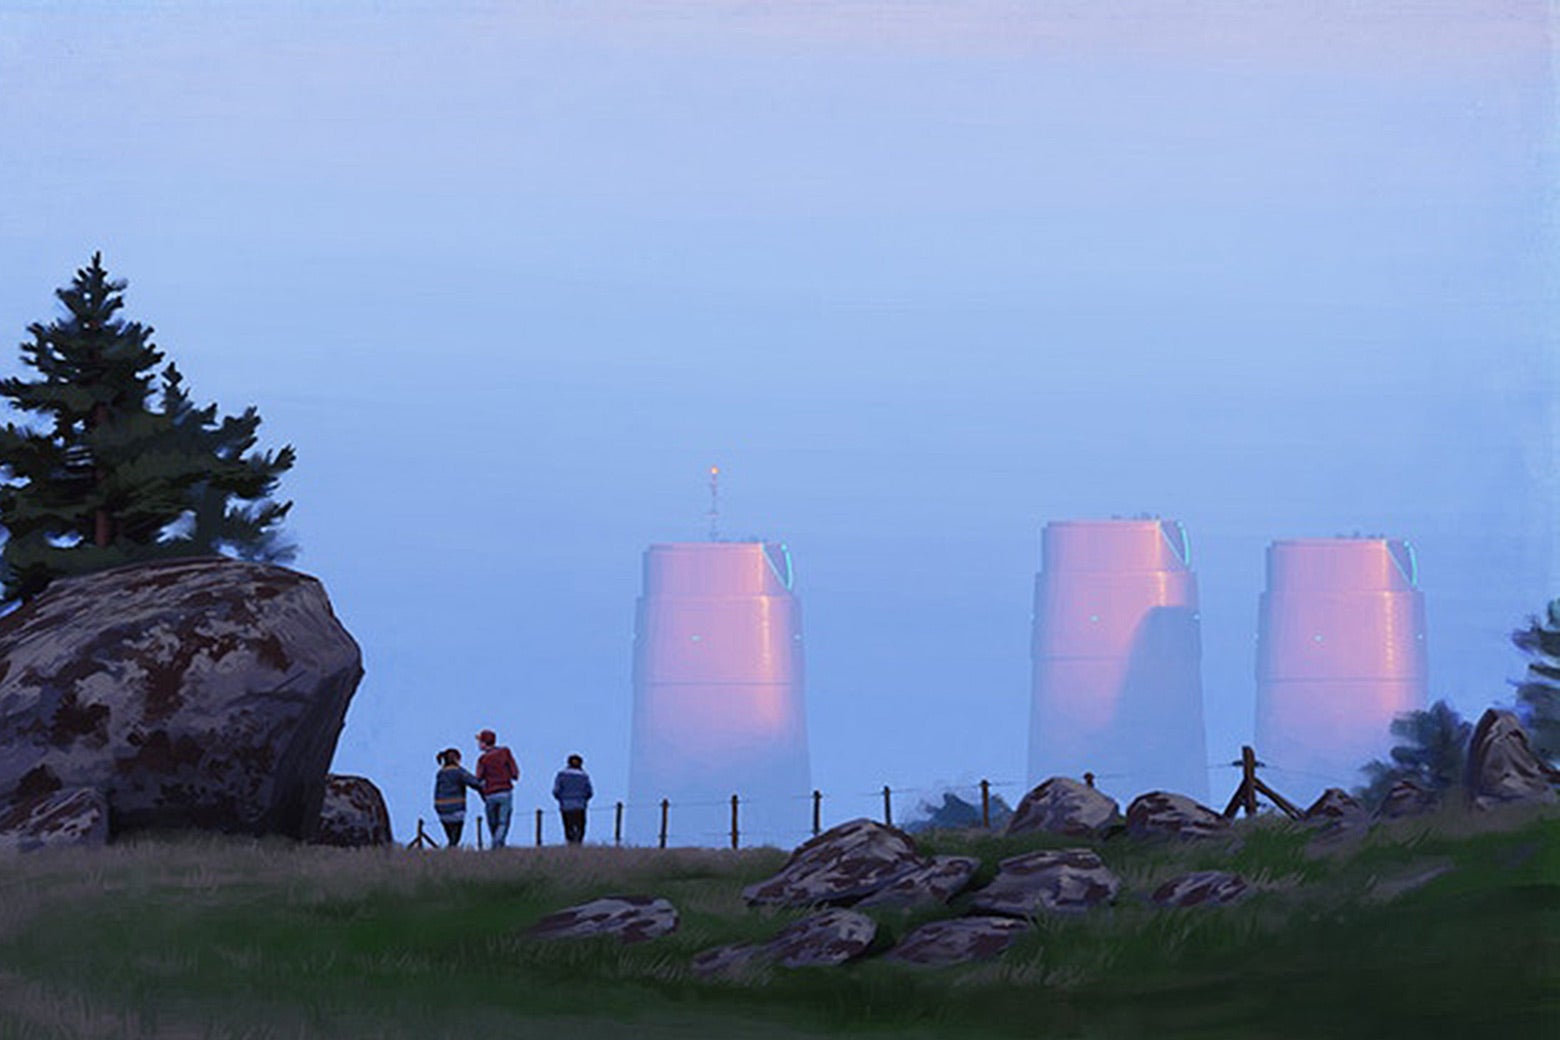 People at a lookout point with futuristic buildings in the distance.